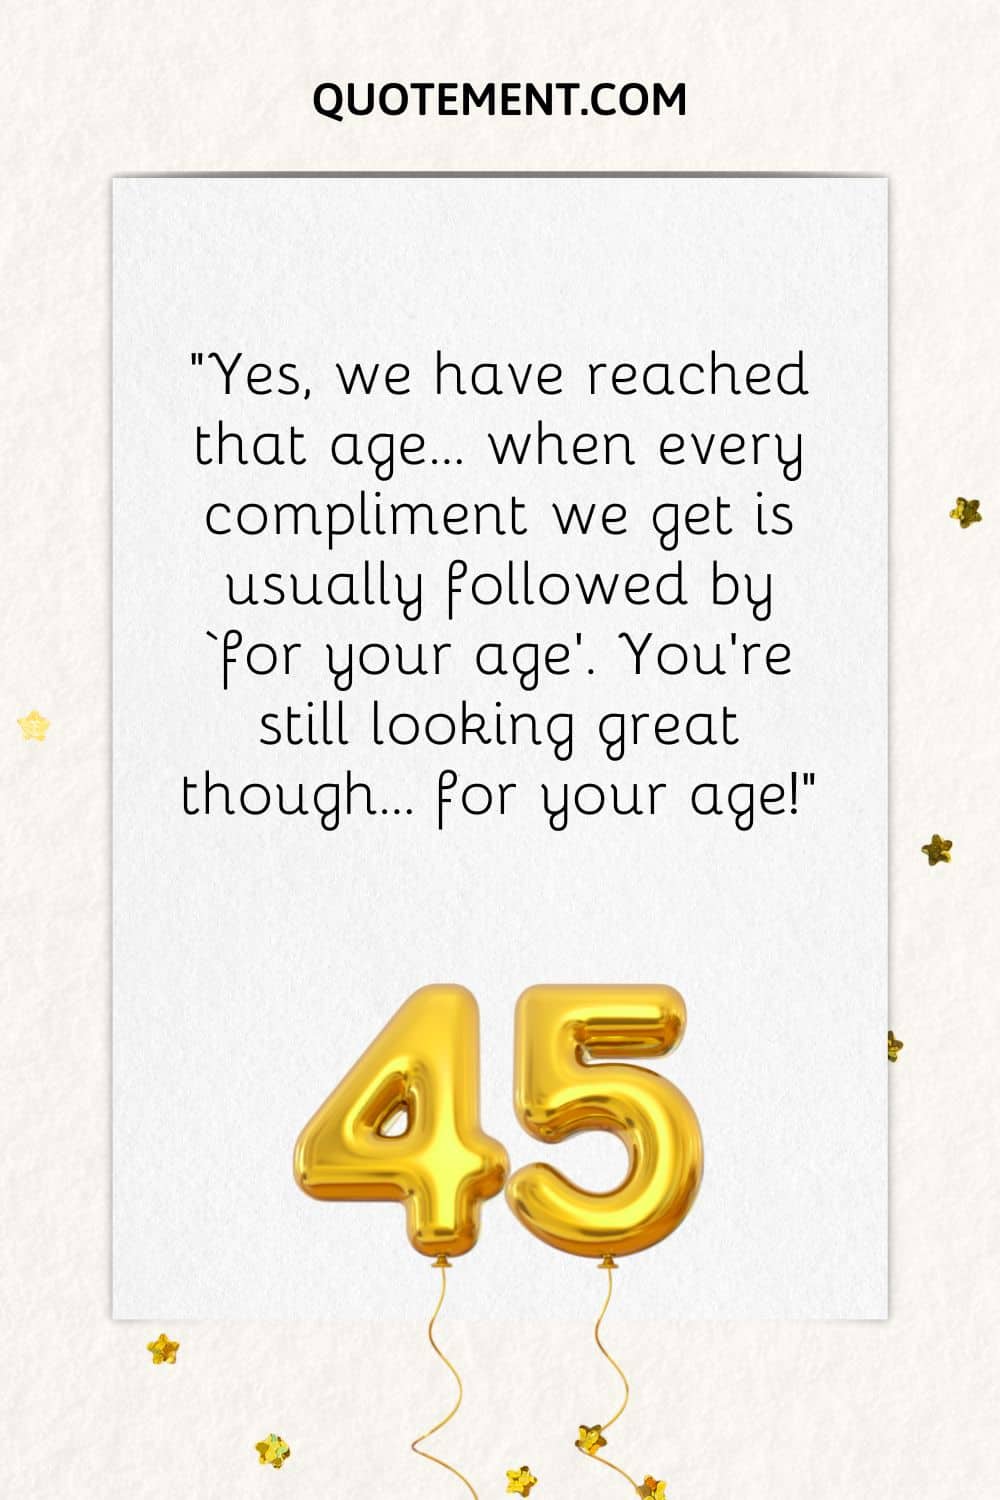 “Yes, we have reached that age… when every compliment we get is usually followed by ‘for your age’. You’re still looking great though… for your age!”